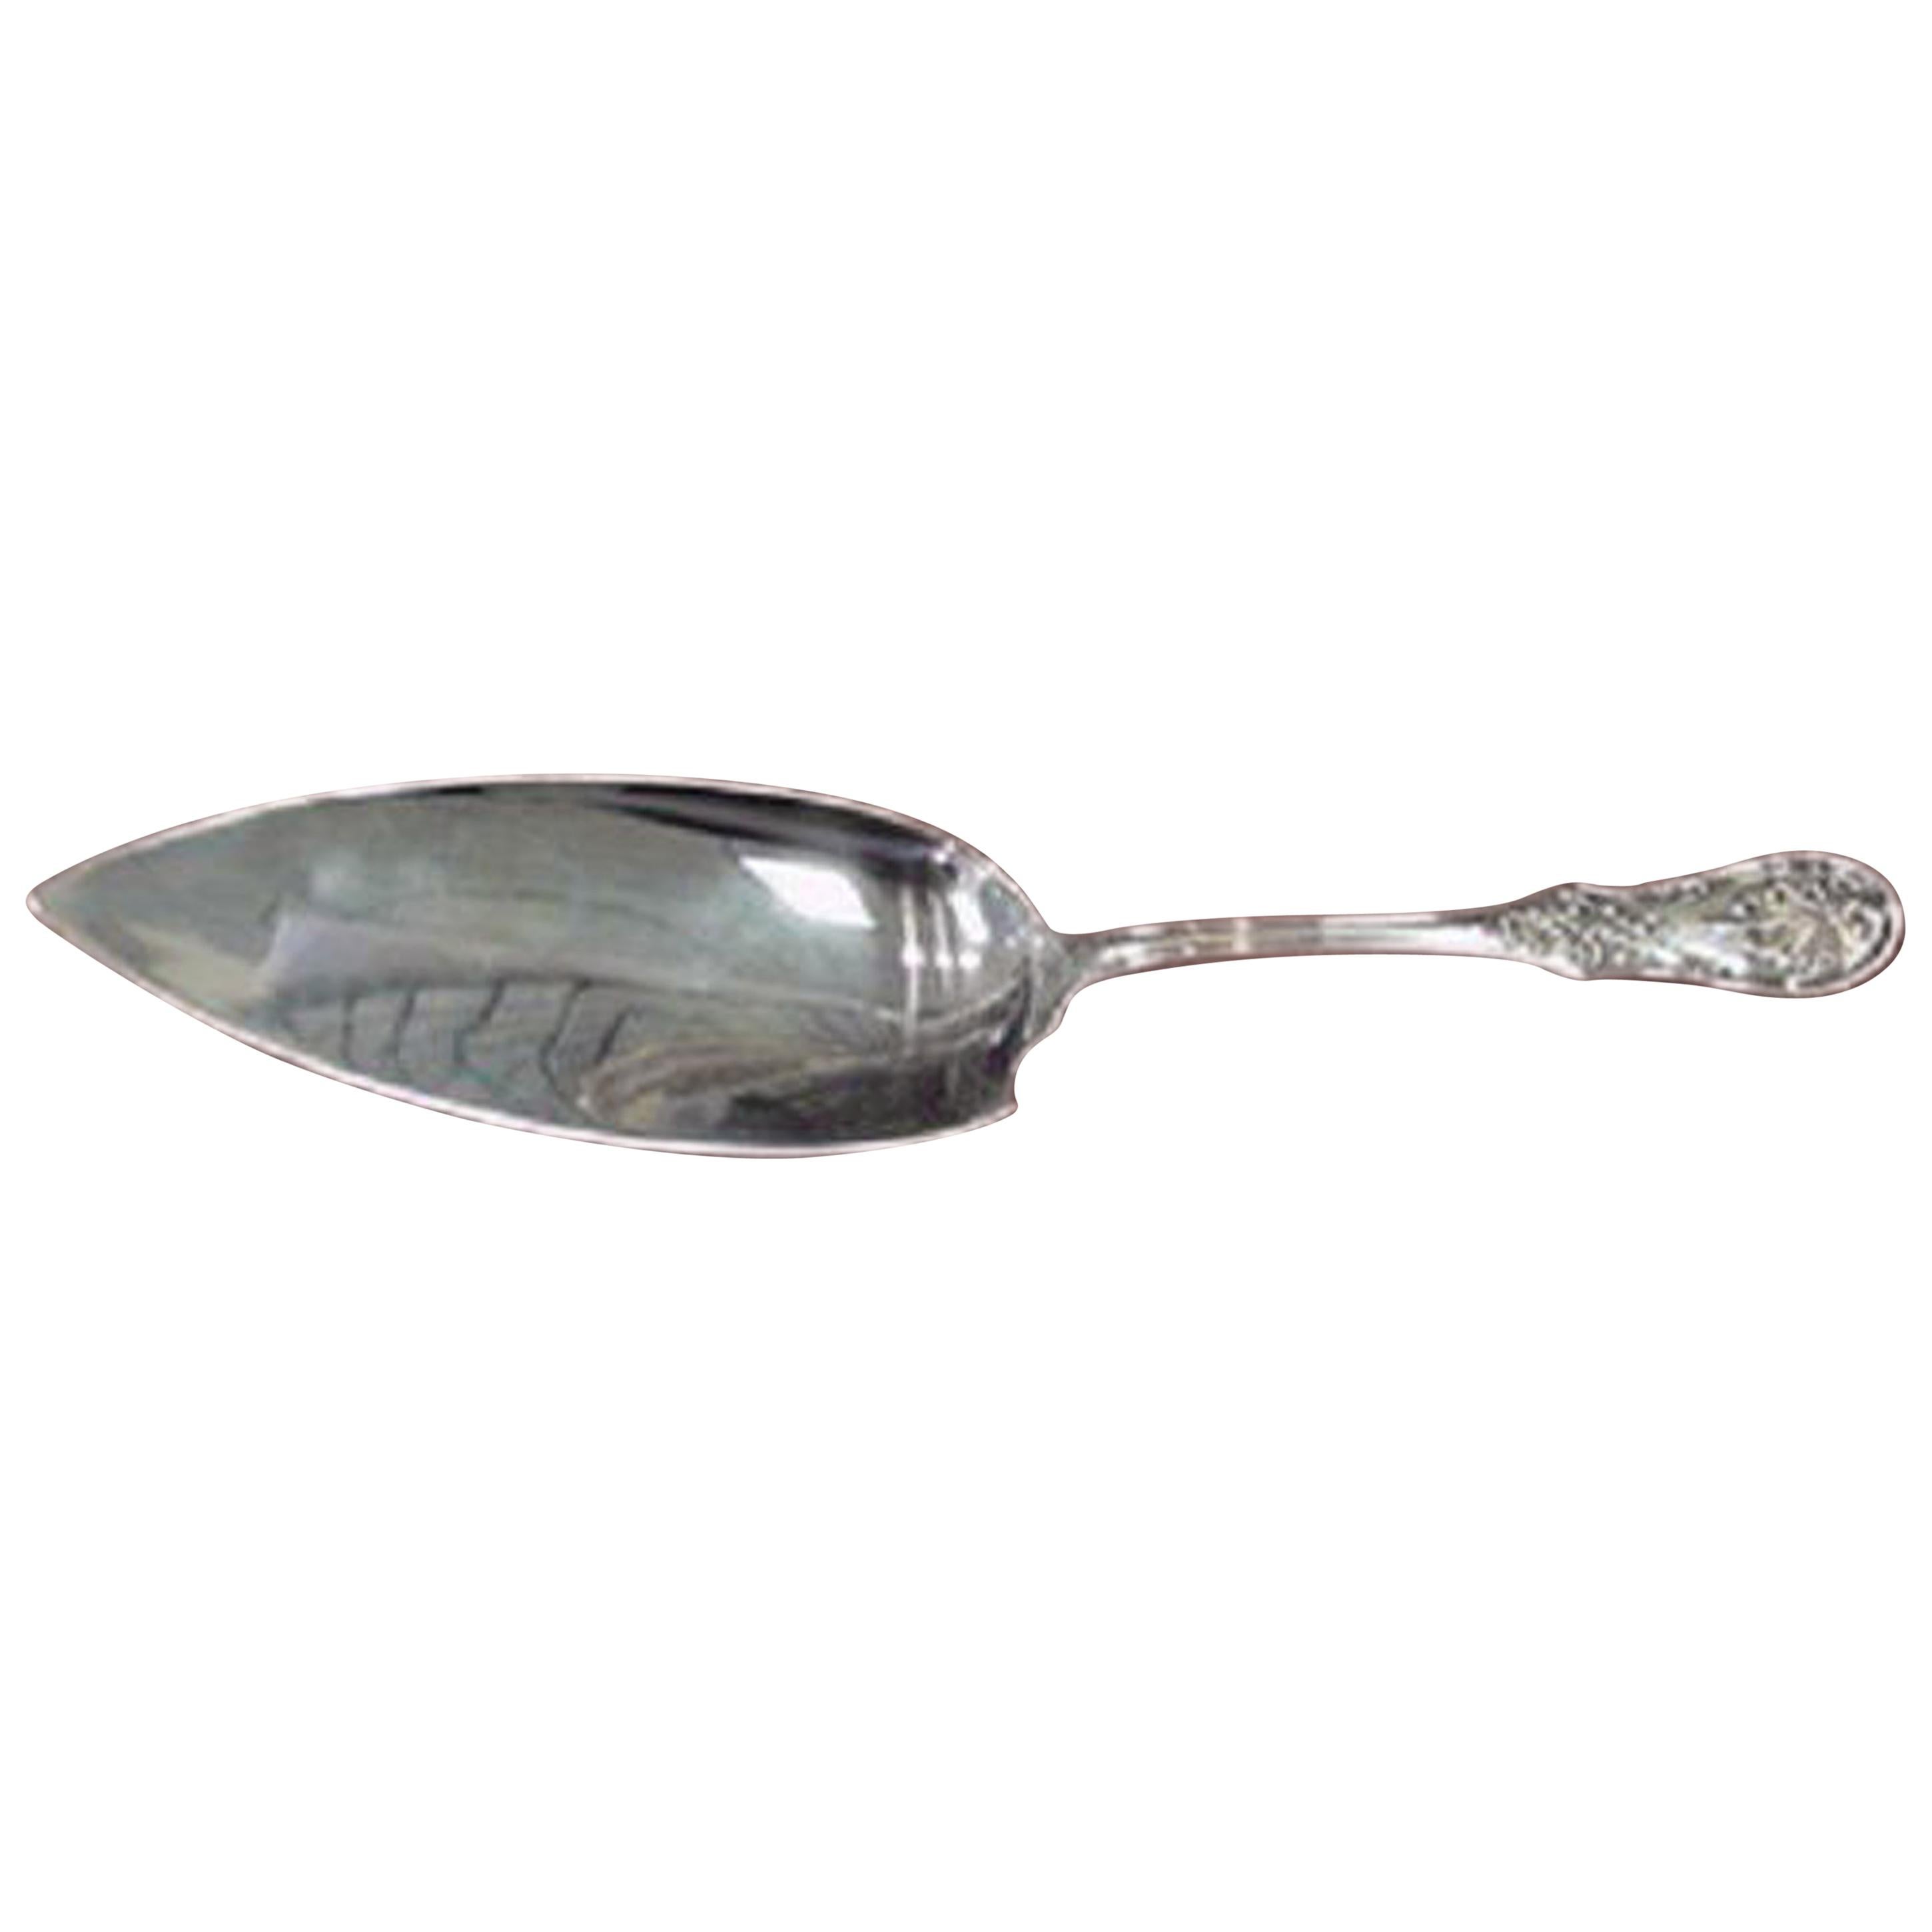 Saratoga by Tiffany & Co. Sterling Silver Fish Server